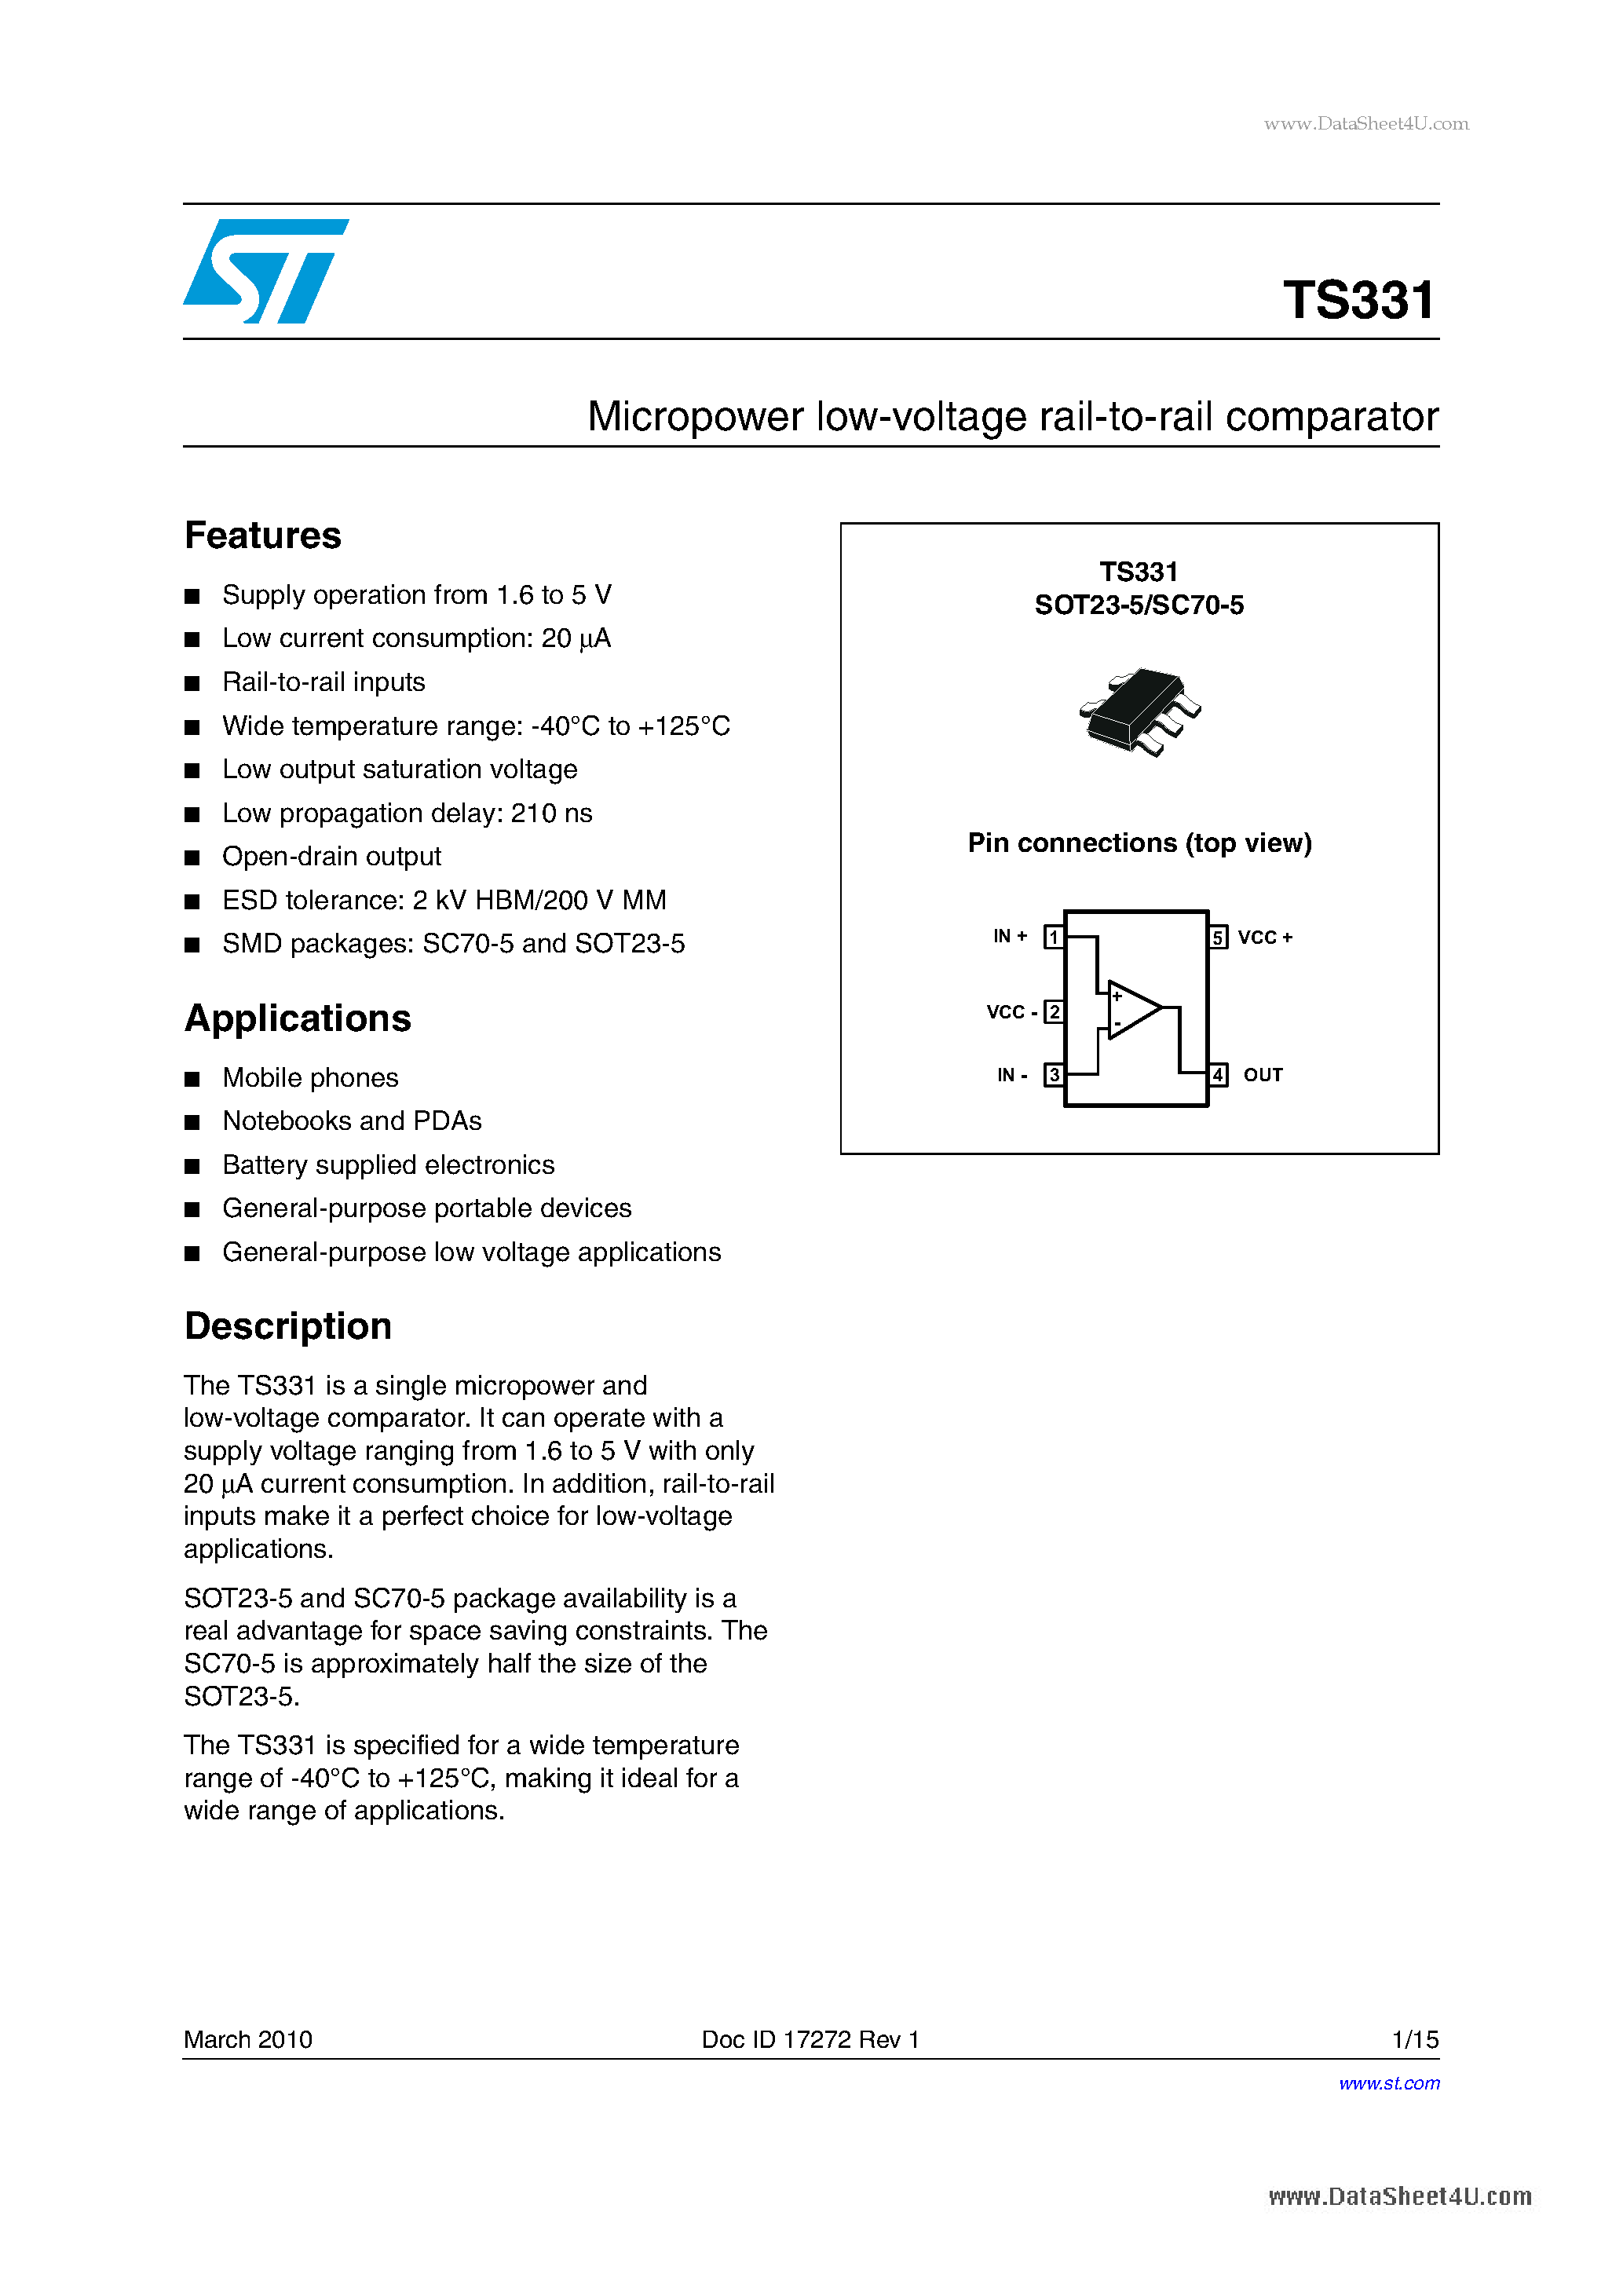 Datasheet TS331 - Micropower low-voltage rail-to-rail comparator page 1